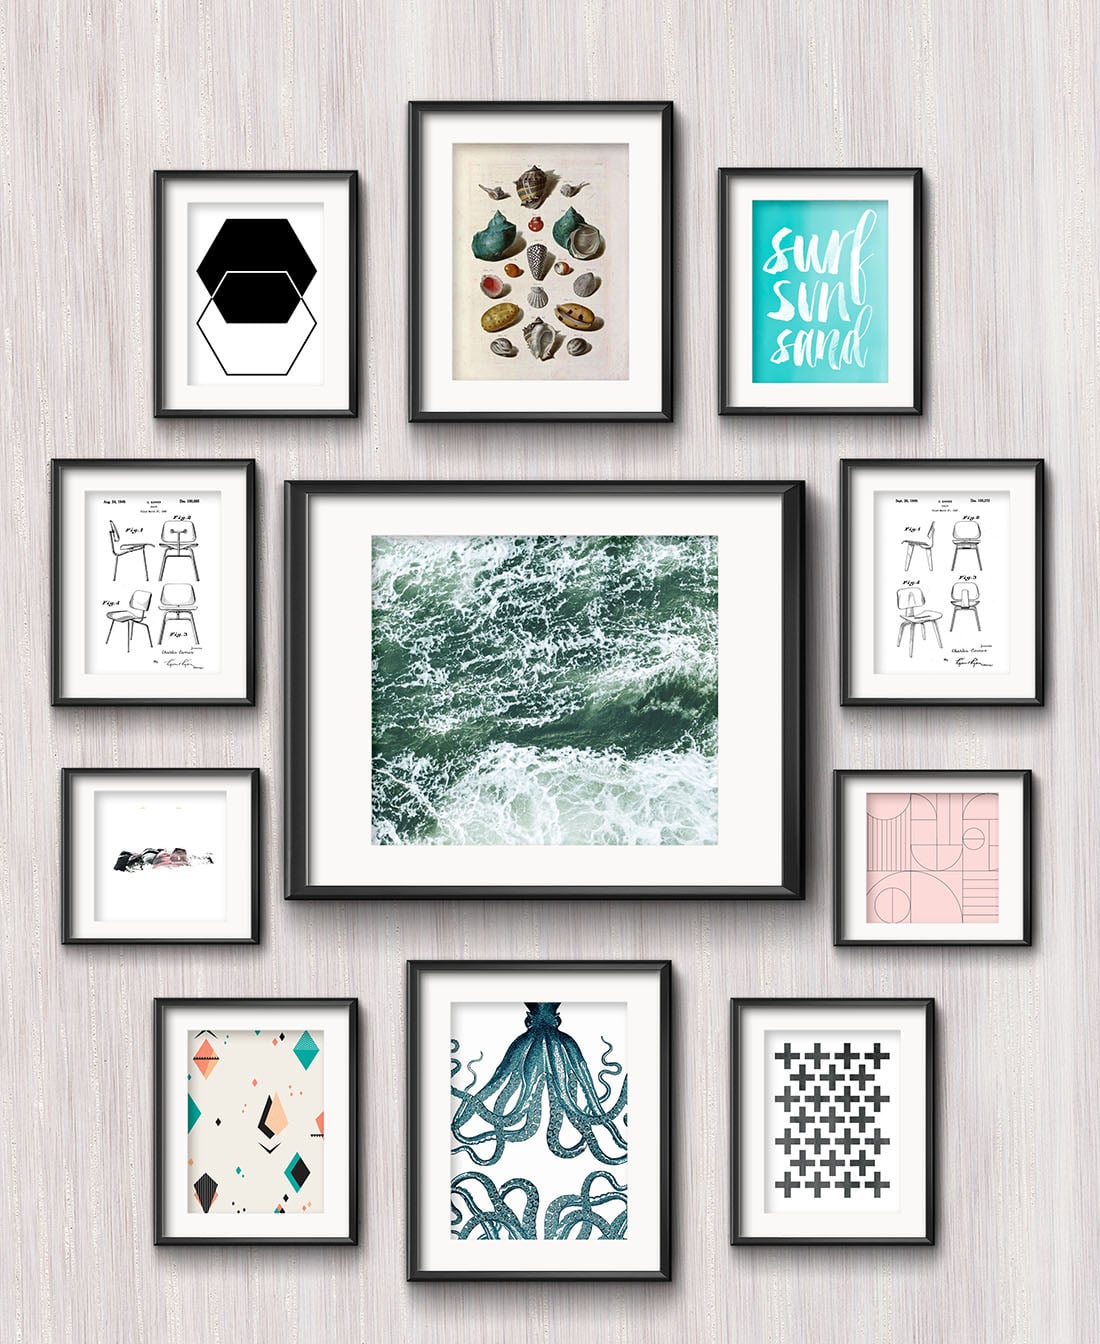 California Beach Vibe Gallery Wall • Frame Game is an occasional series in which I take readers' gallery wall requests and find art that fits their personalities • Little Gold Pixel